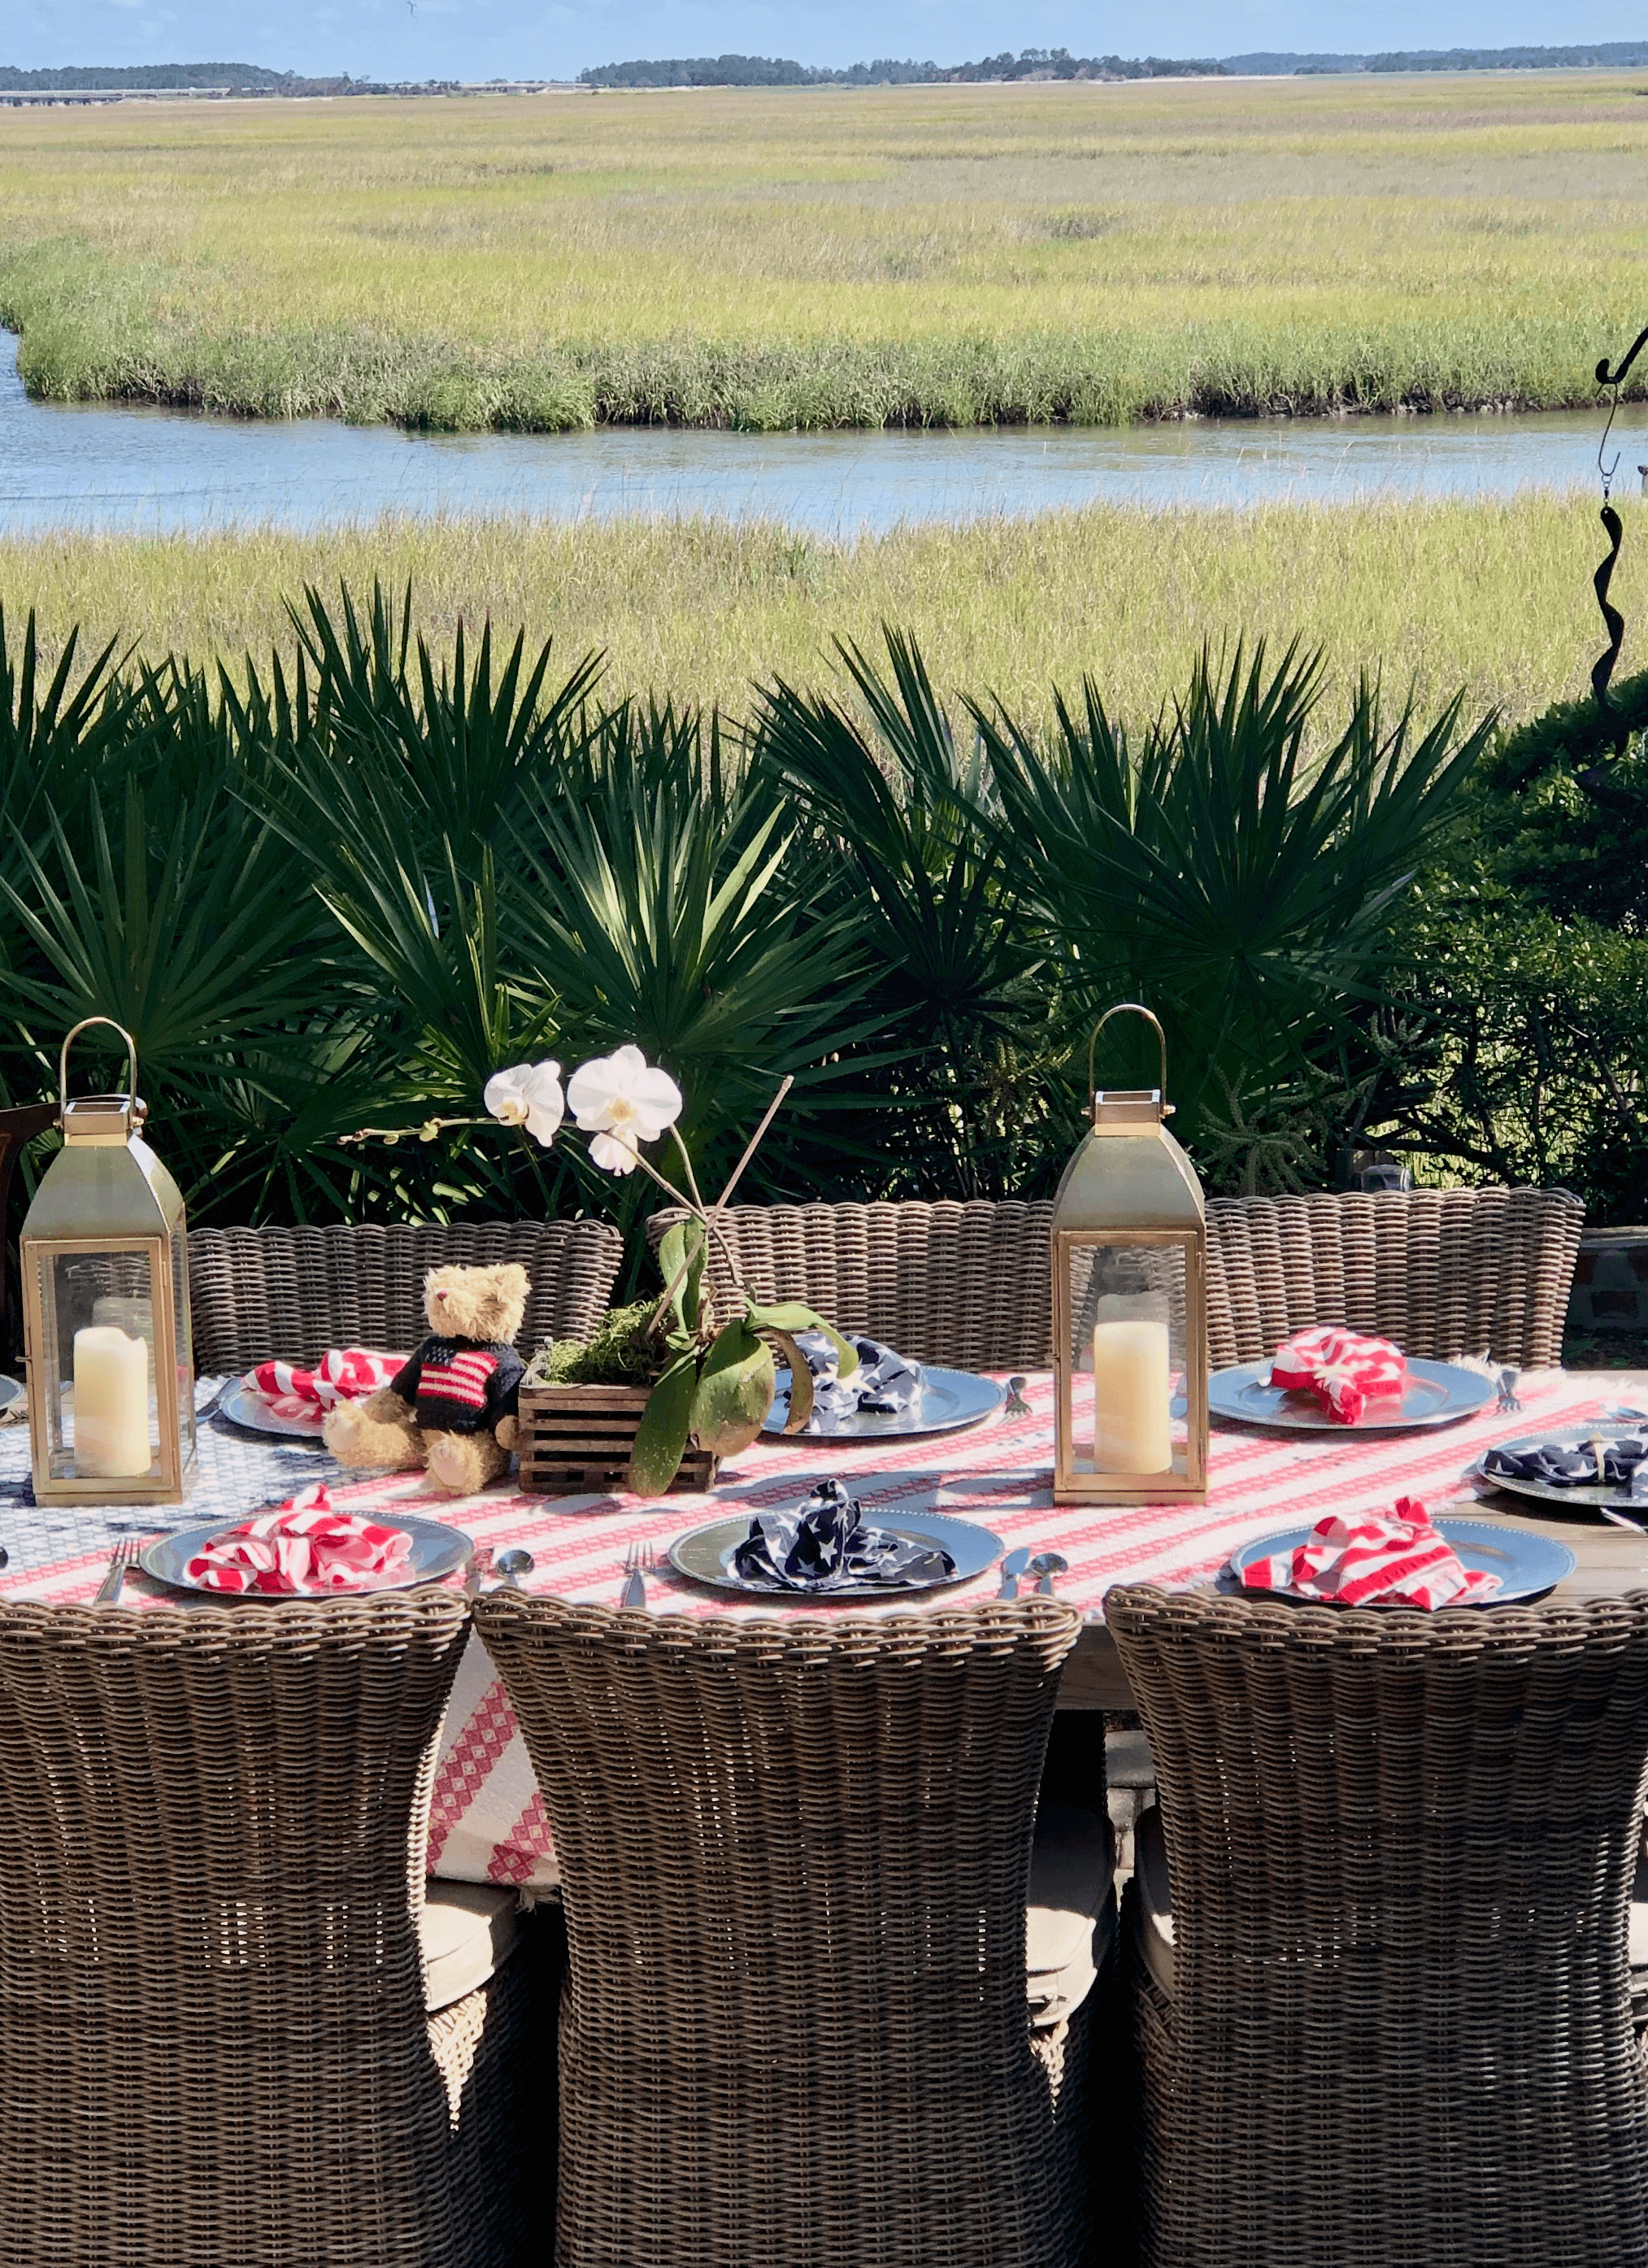 4th of July or Memorial Day Table photo by Kathy Miller